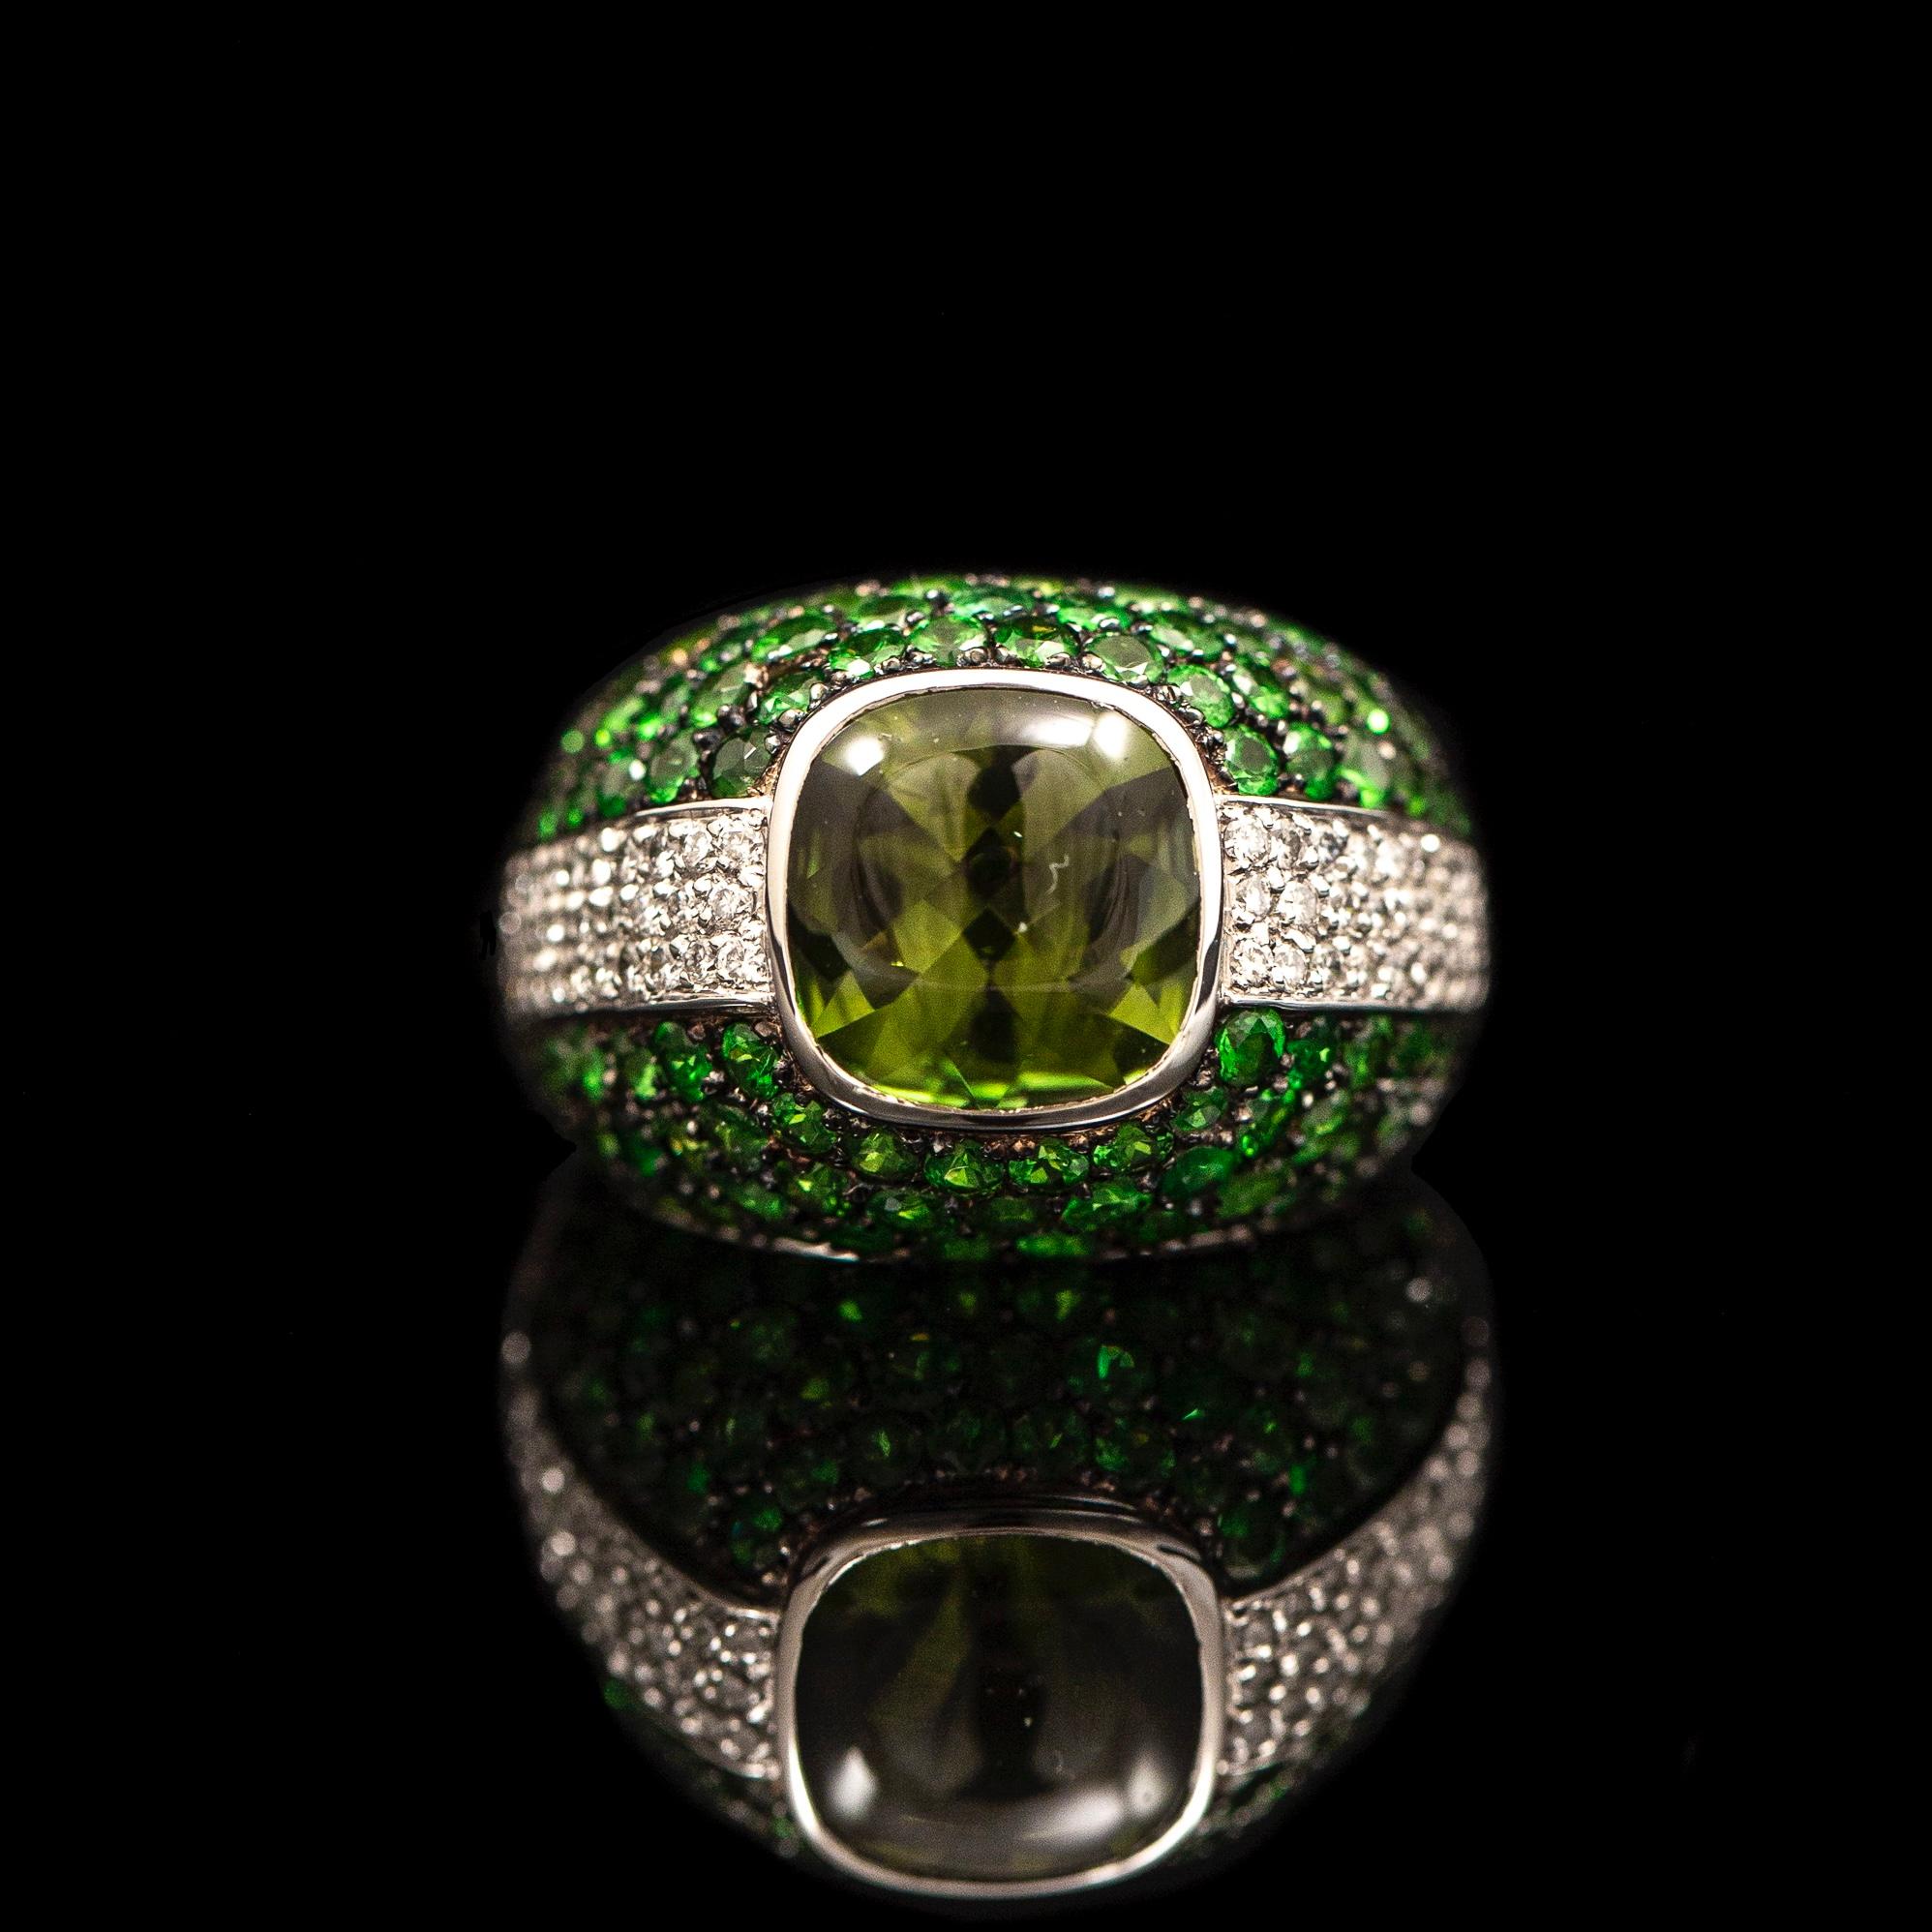 Vintage peridot, tsavorite garnet and diamond cocktail ring in 19.2kt white gold, Italy, late 20th century. This bombe ring features a cushion-shape buff-top yellowish-green peridot bezel-set to the center with a cabochon crown and a faceted